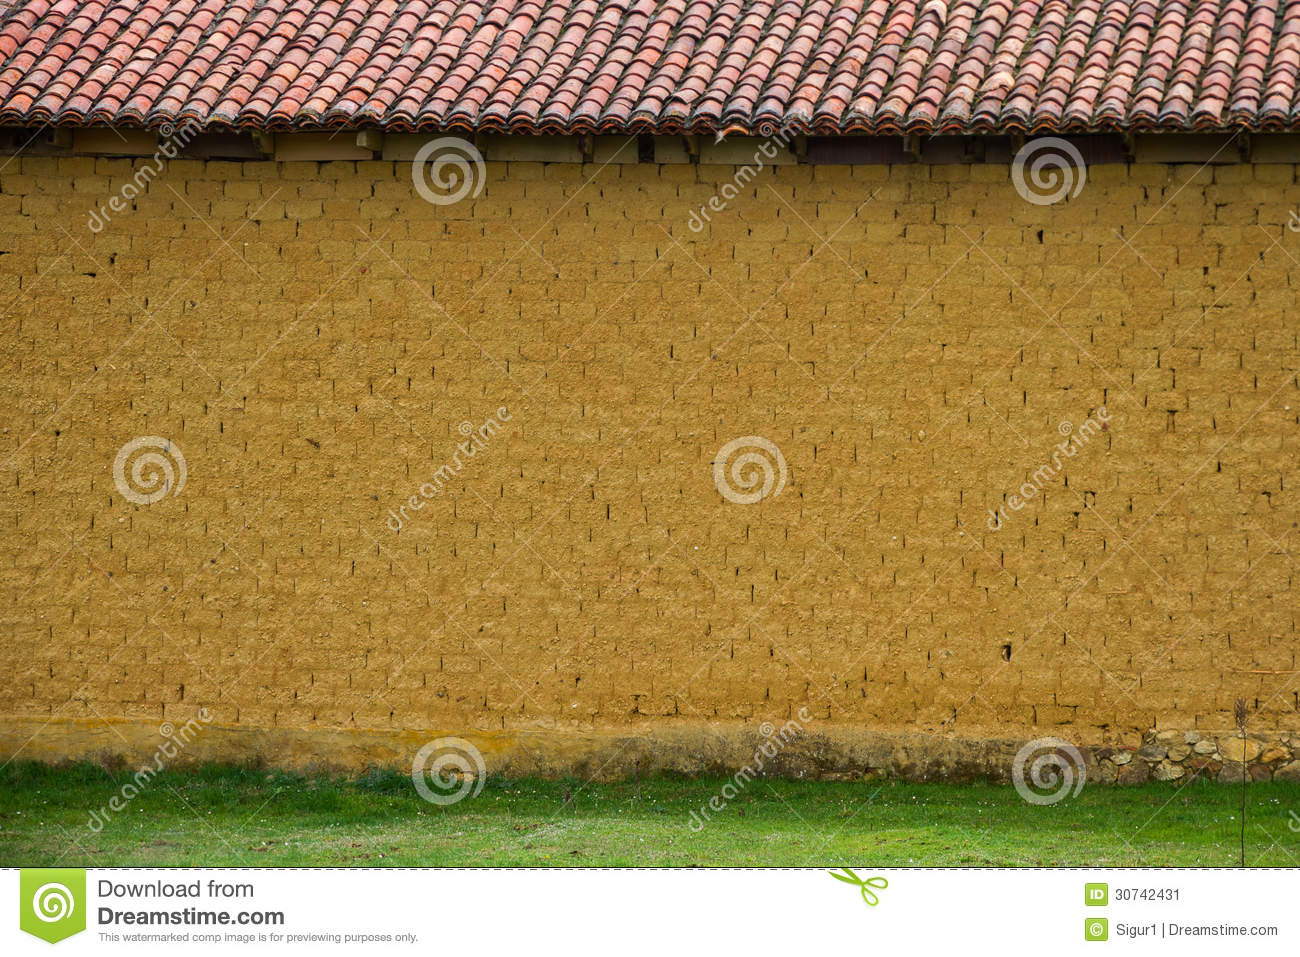 Front Wall Of Adobe Or Thatched Mud Bricks Baked In The Sun And Red